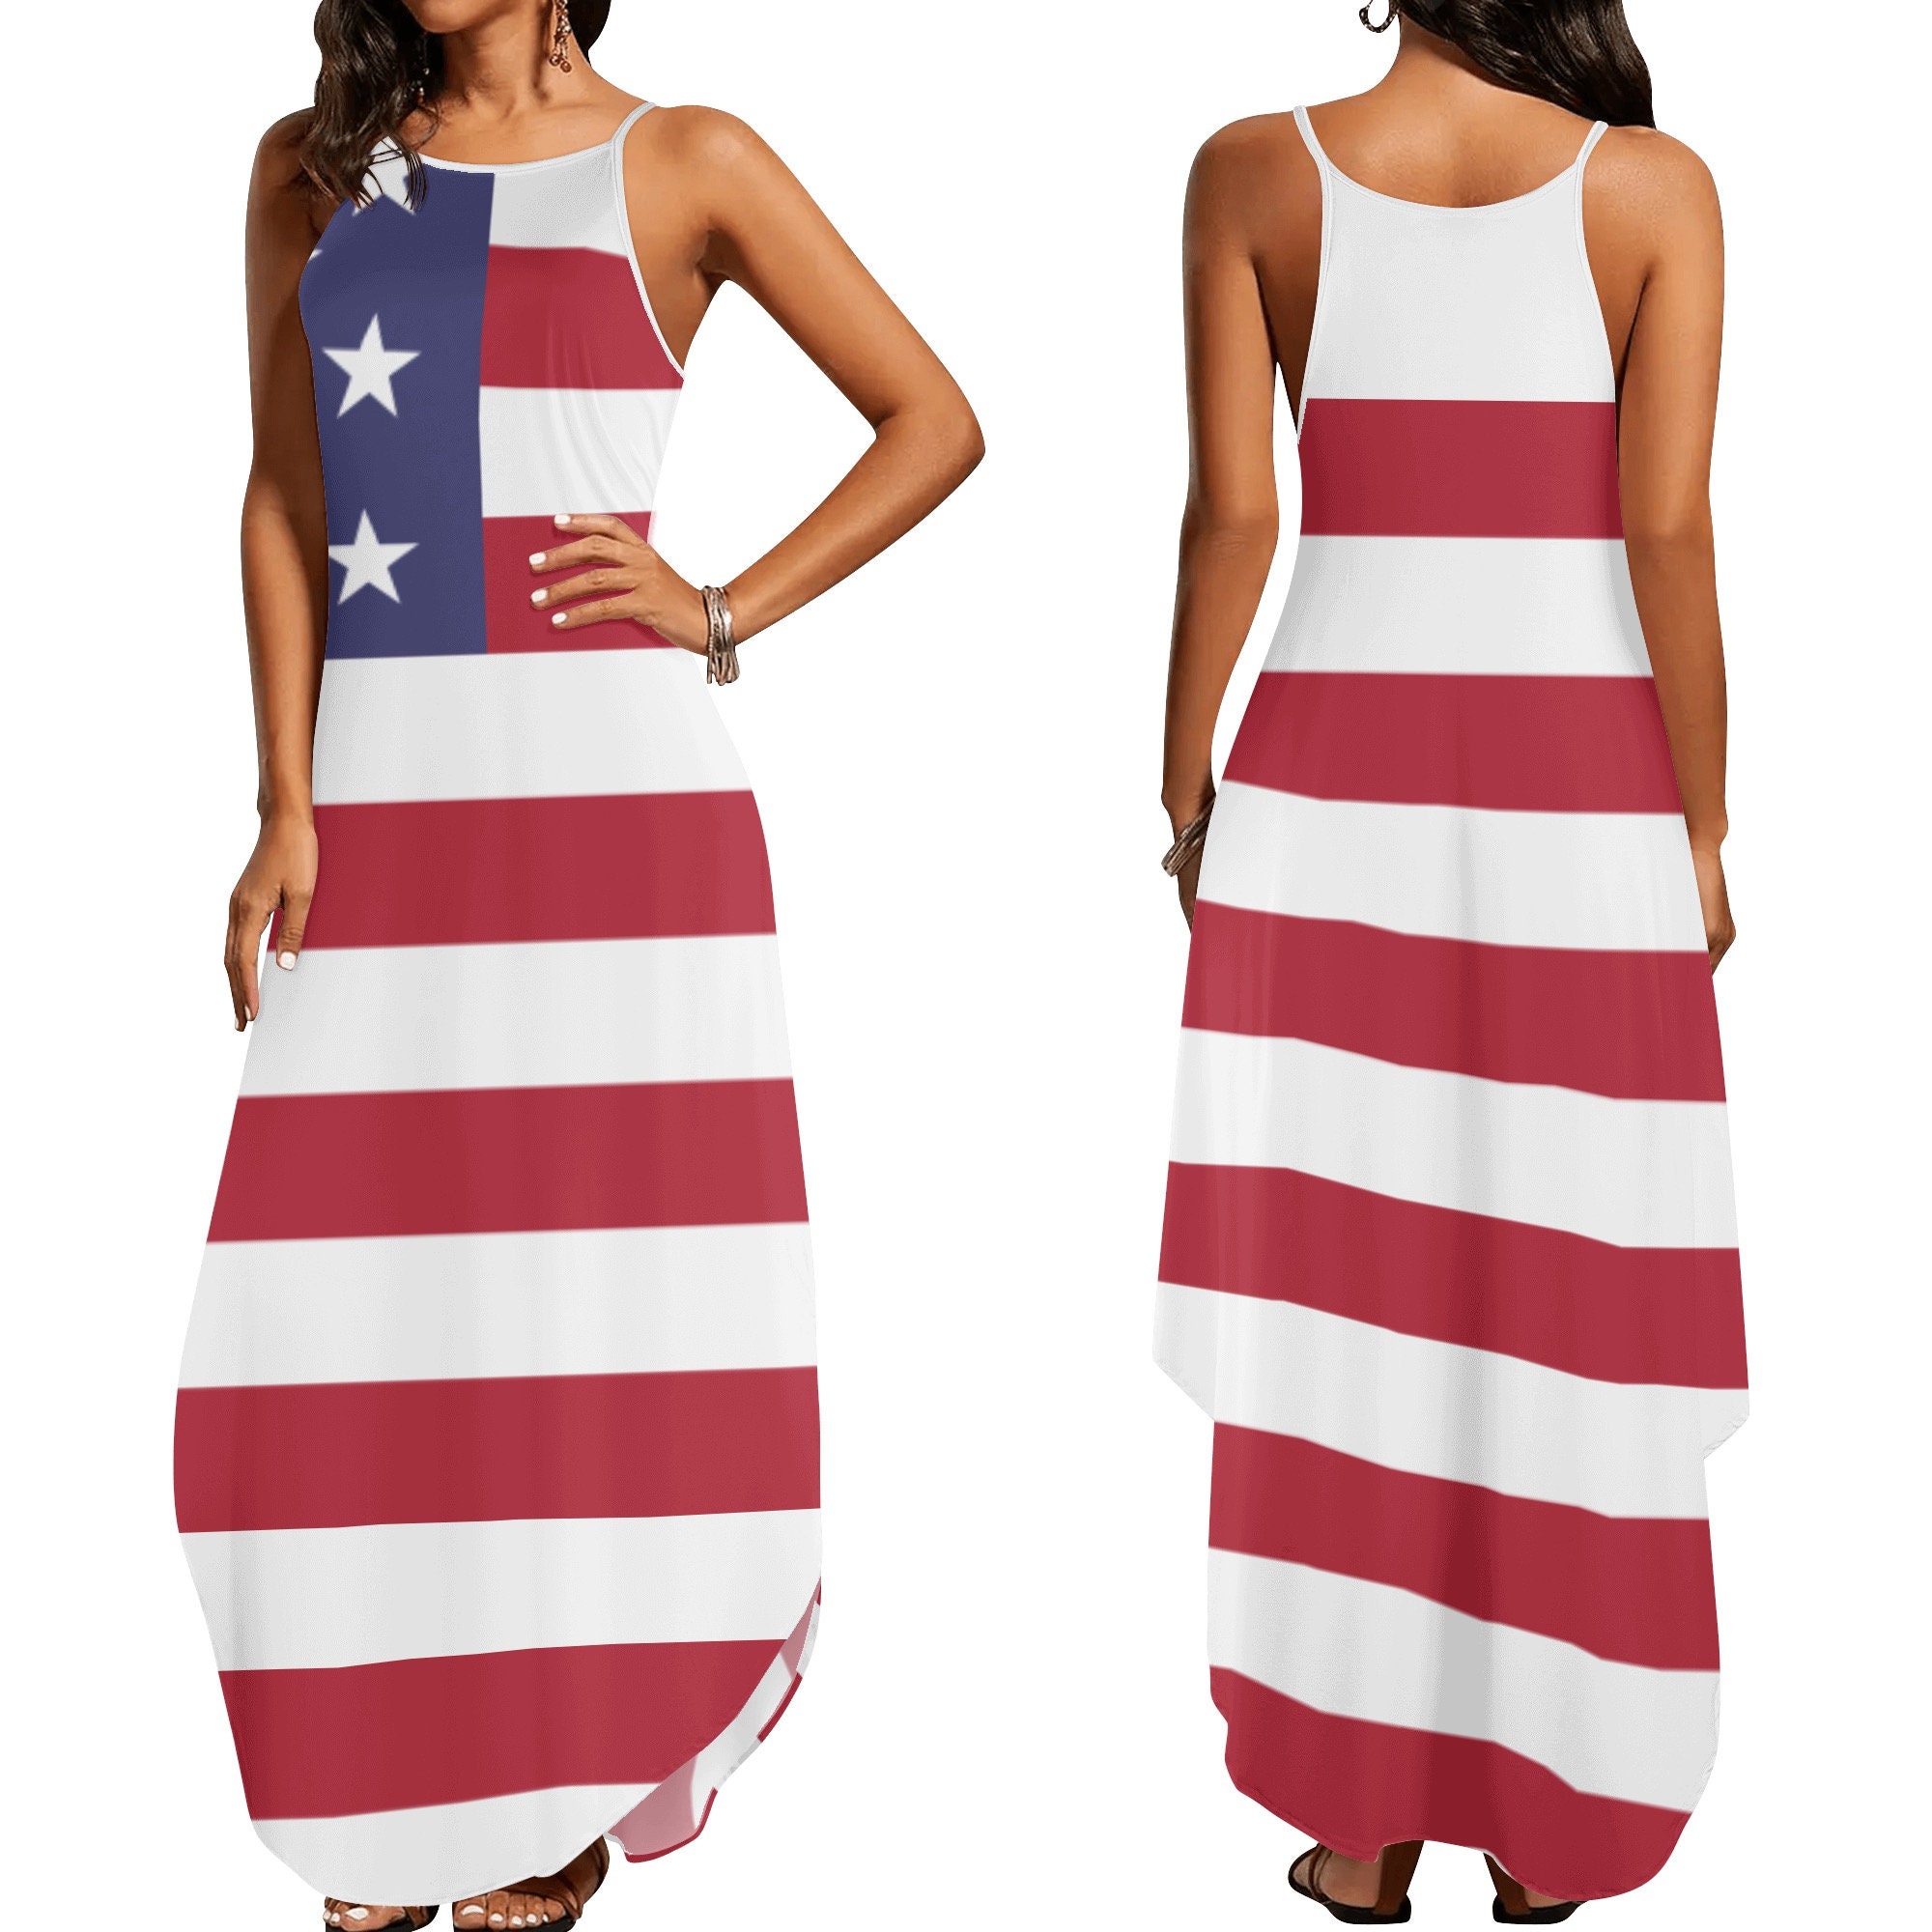 Wycnly Dresses for Women Independece Day Patriotic High Waist Spaghetti  Strap Dresses for 4th of July Sleeveless V-Neck USA Flag Print Summer Maxi  Formal Dress Blue XXXL 